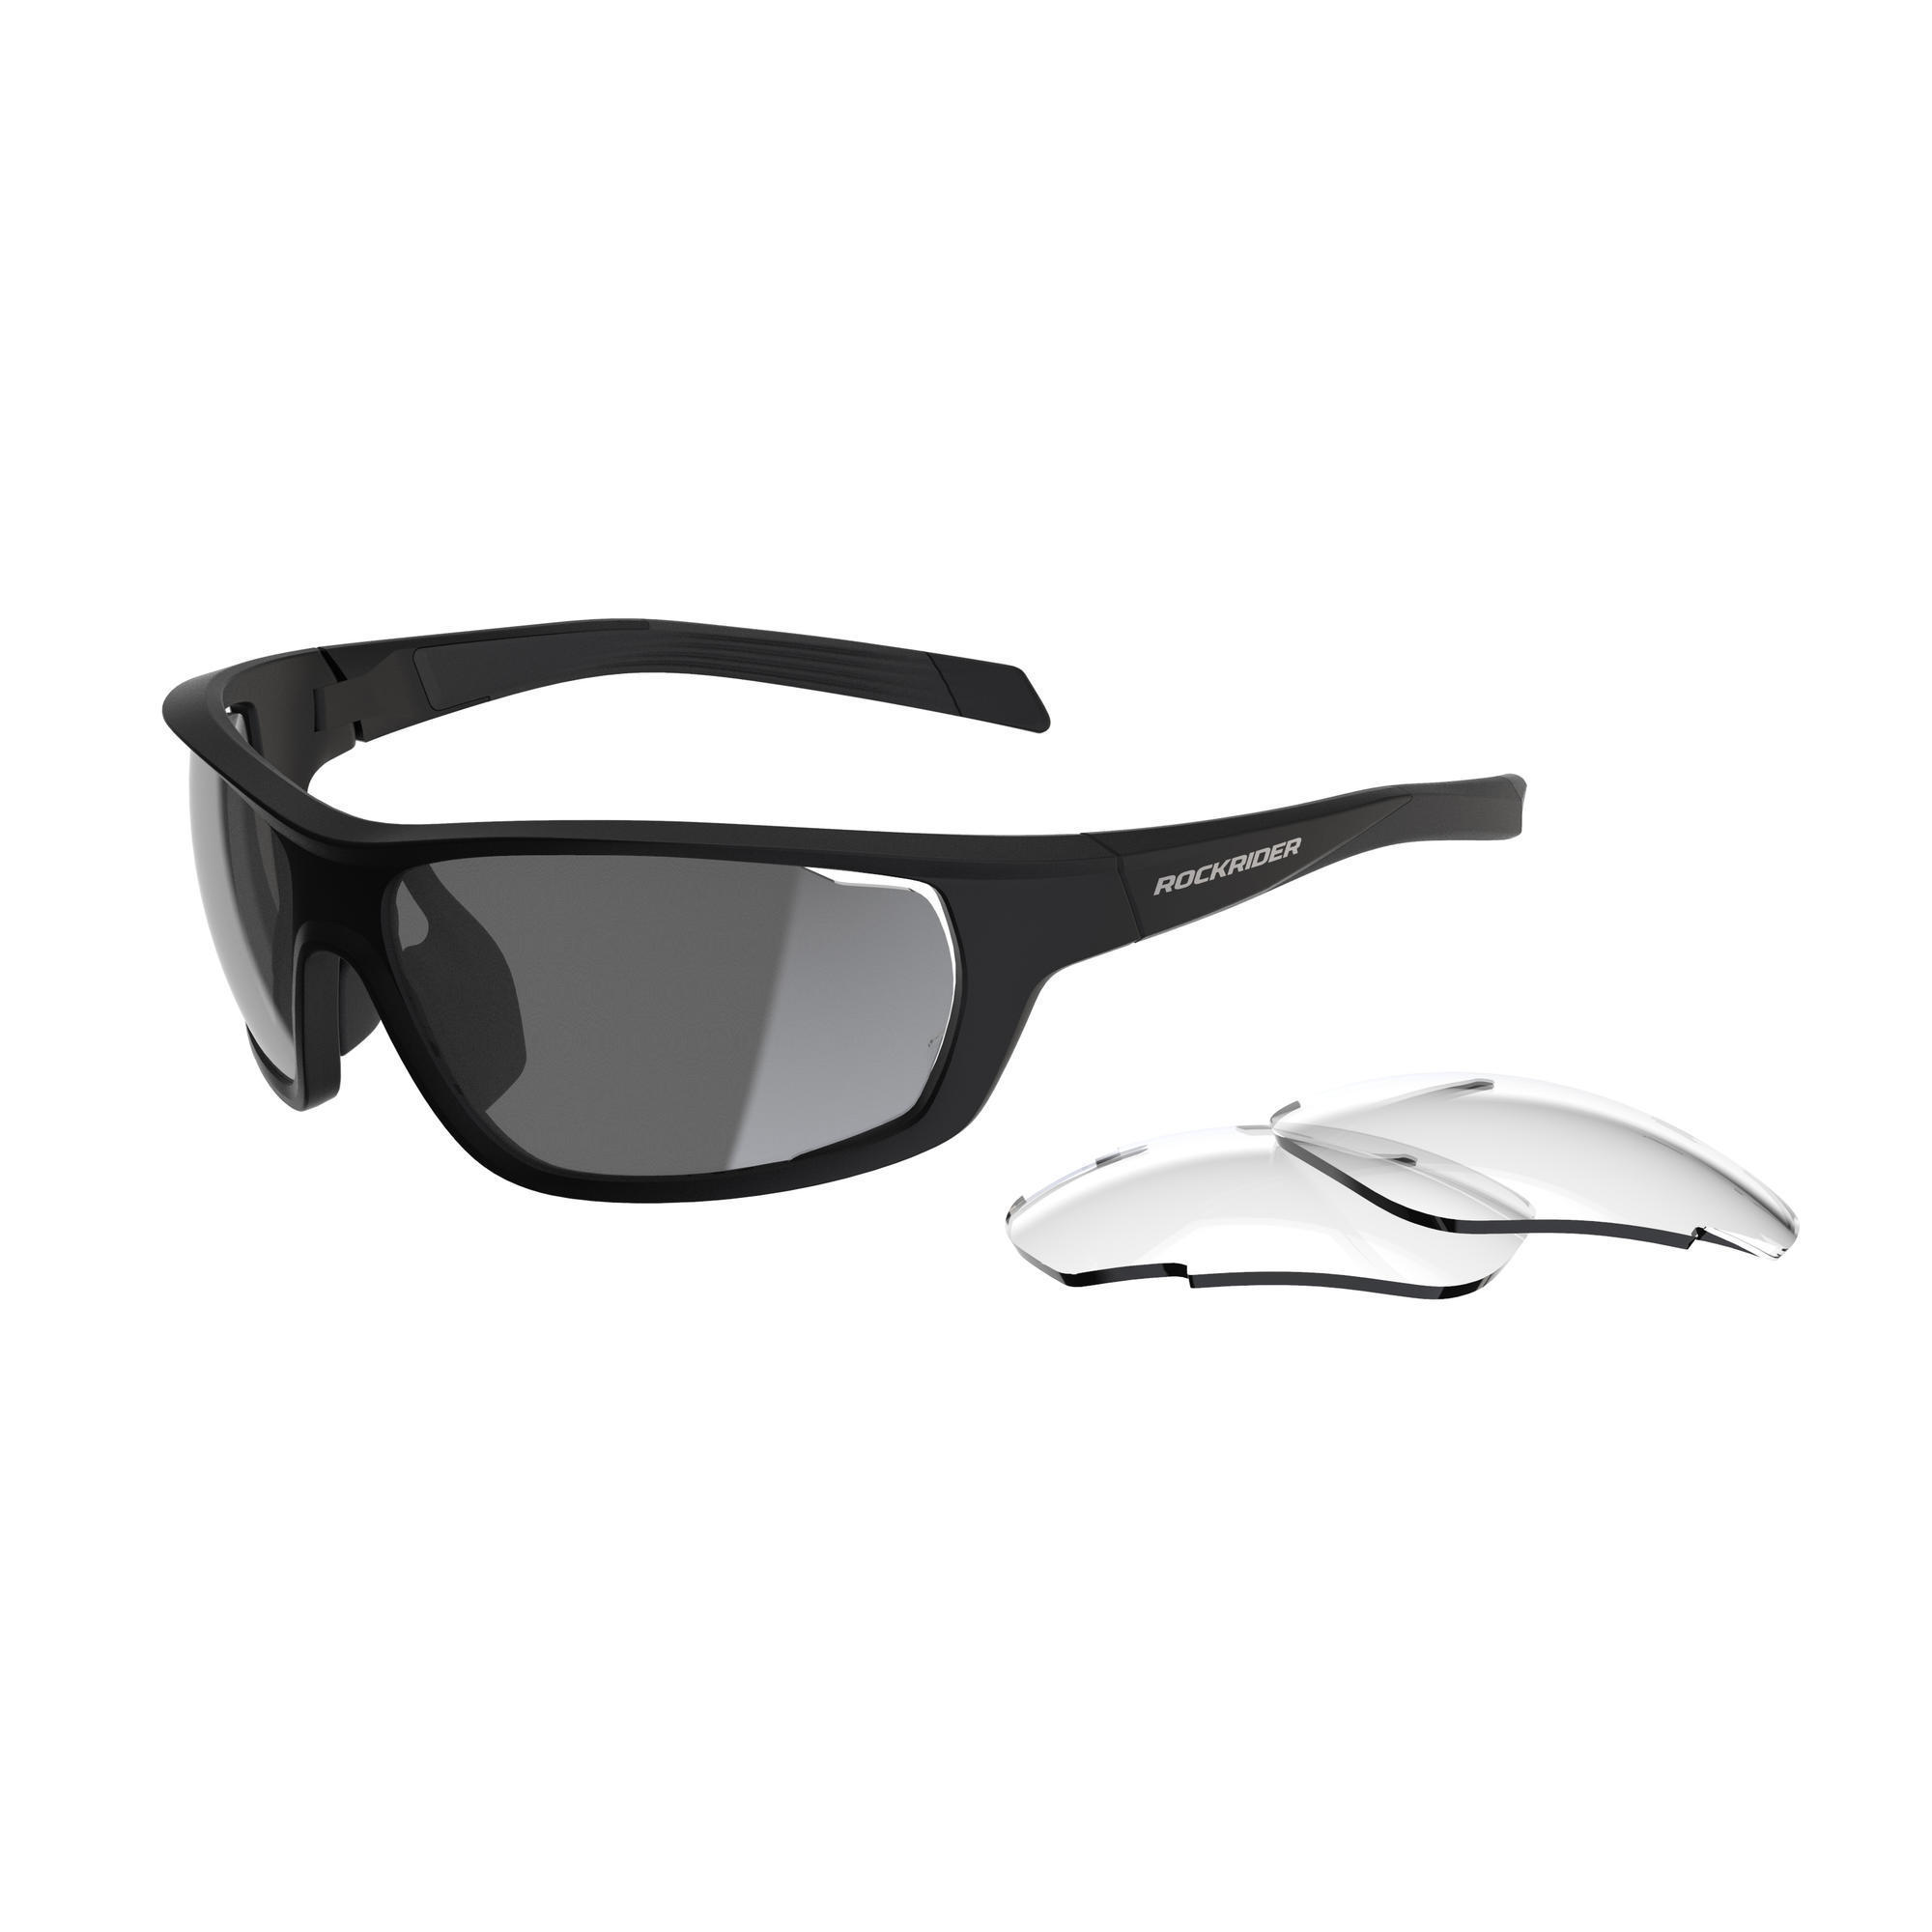 Cycling and running sunglasses - Decathlon